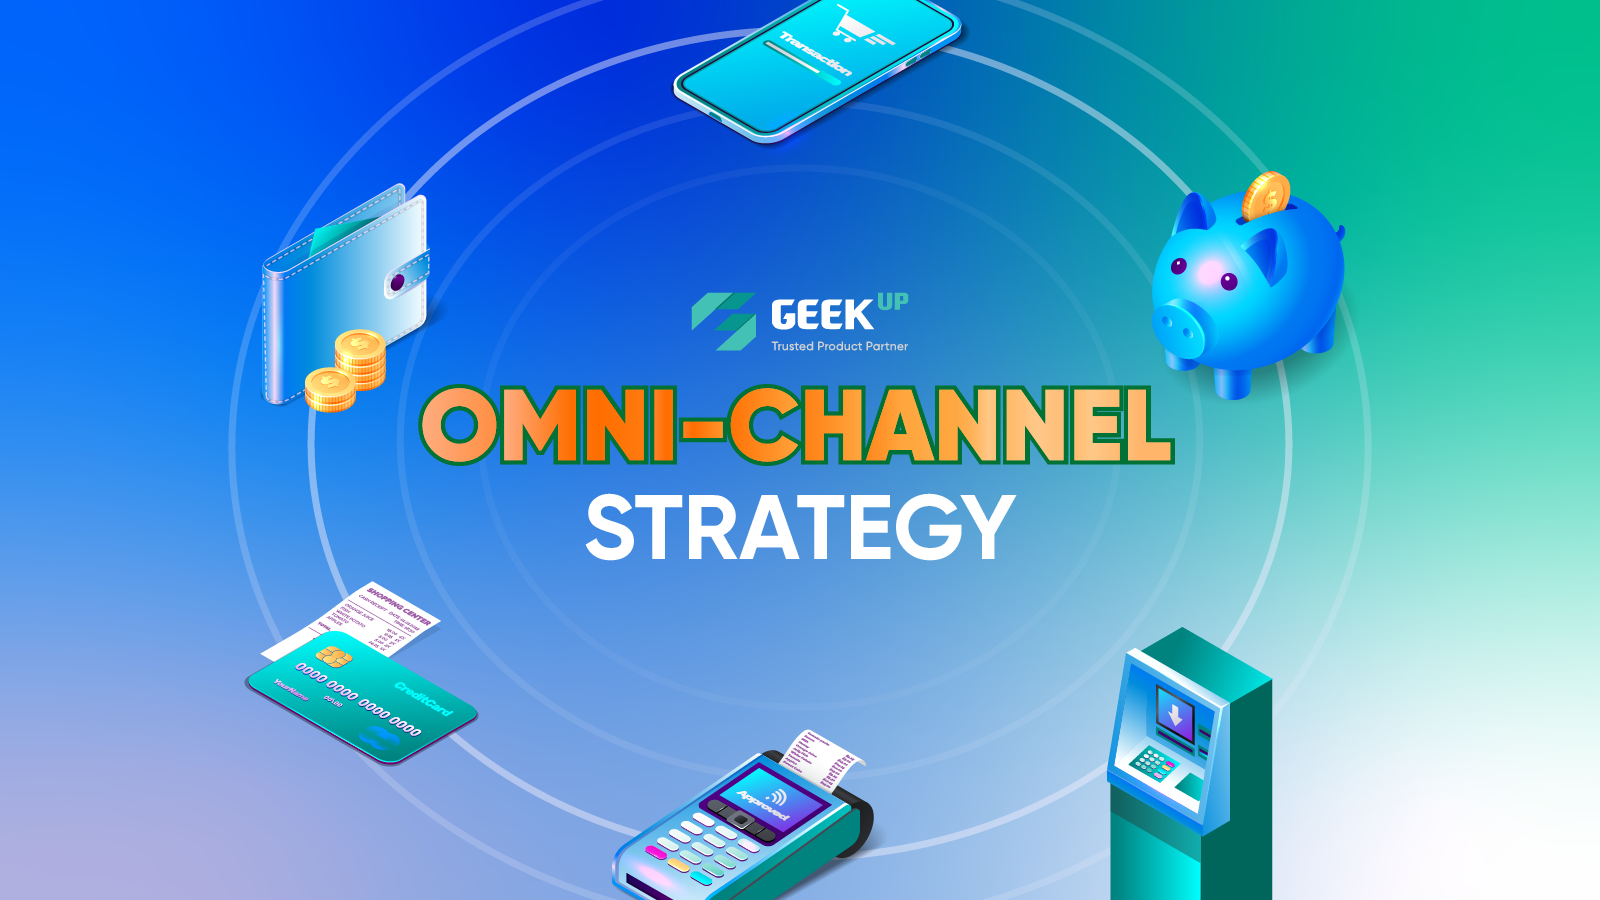 Building digital products according to Omni-channel orientation